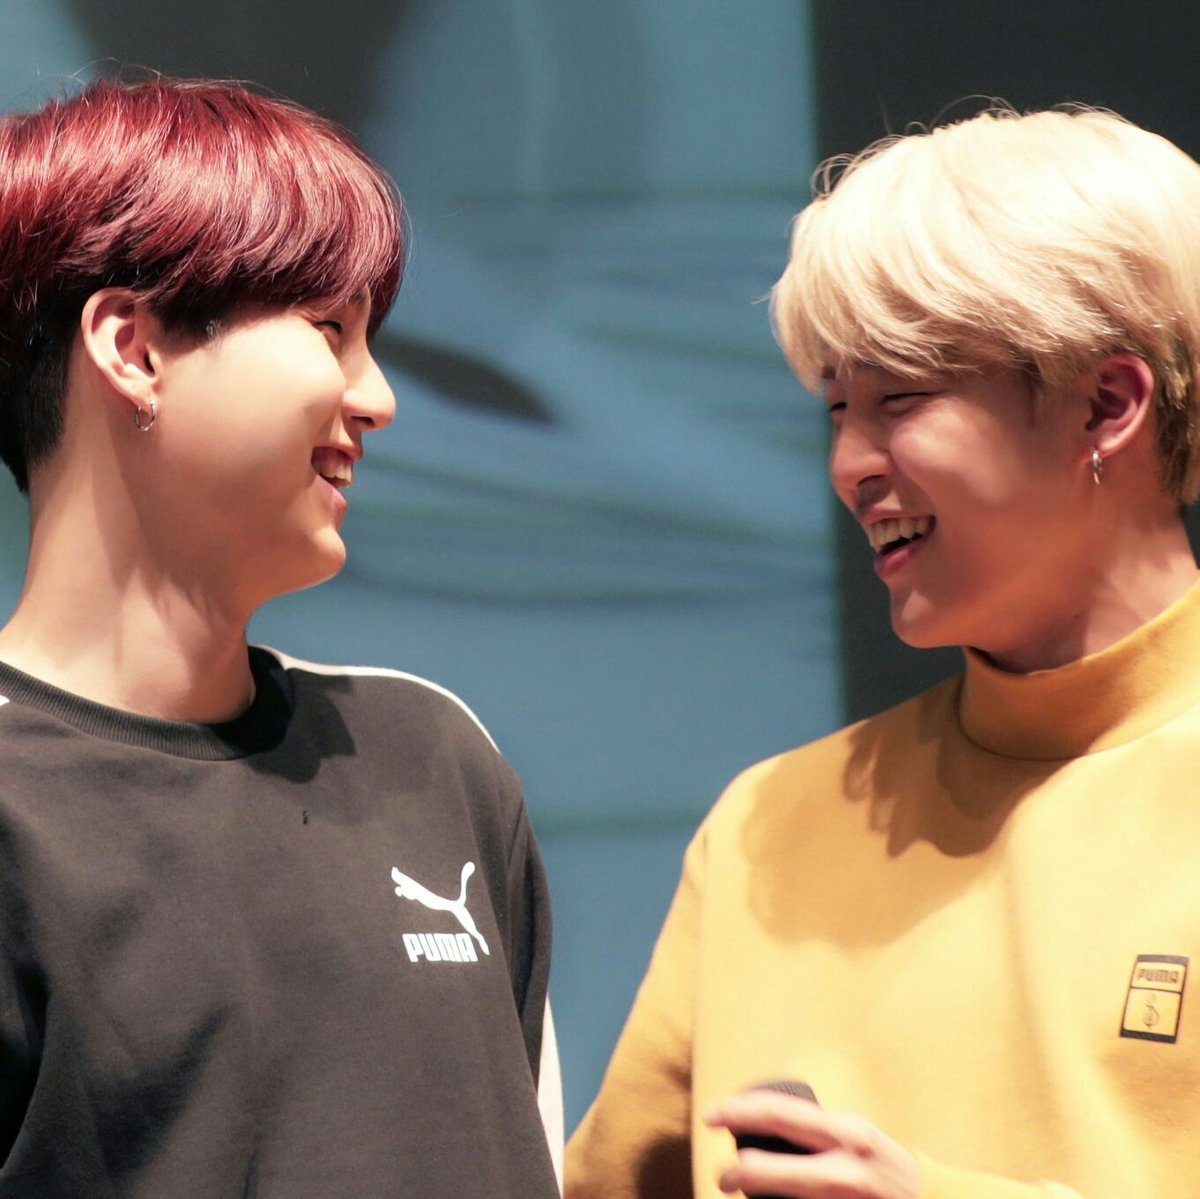 When they smile looking at each other my whole world brightens up. They have the most beautiful smiles in this whole world.